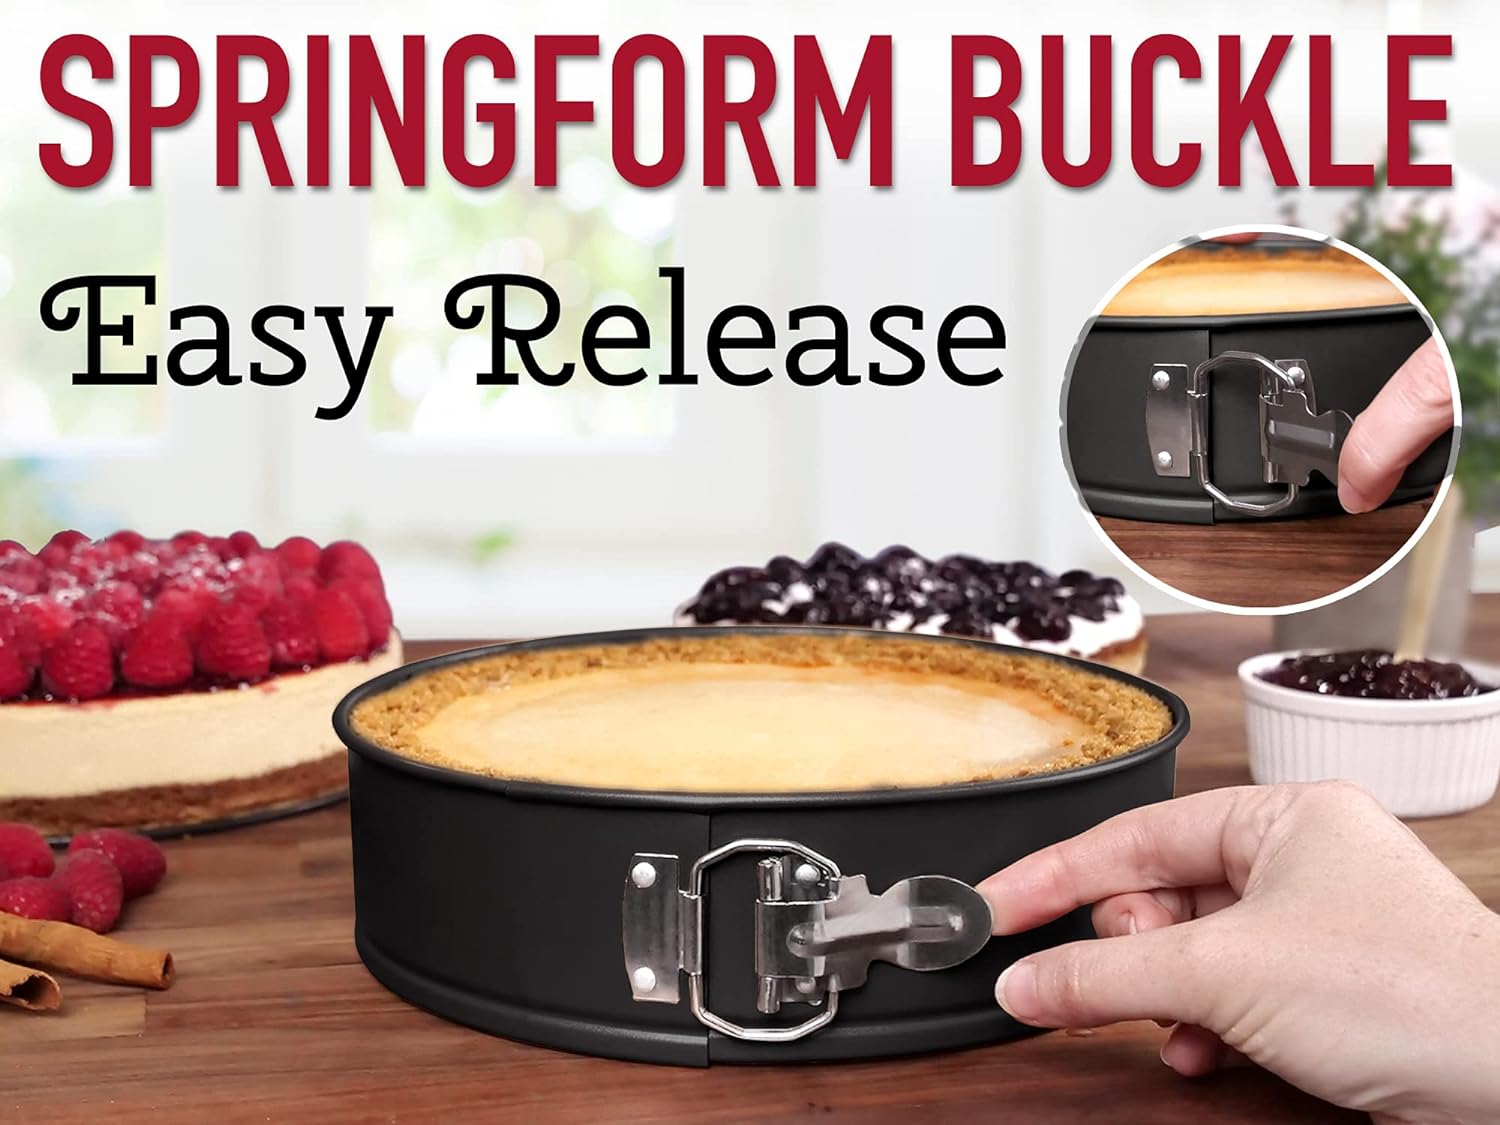 Tasty 10 Springform and Cheesecake Pan Non-Stick - Set of 2 